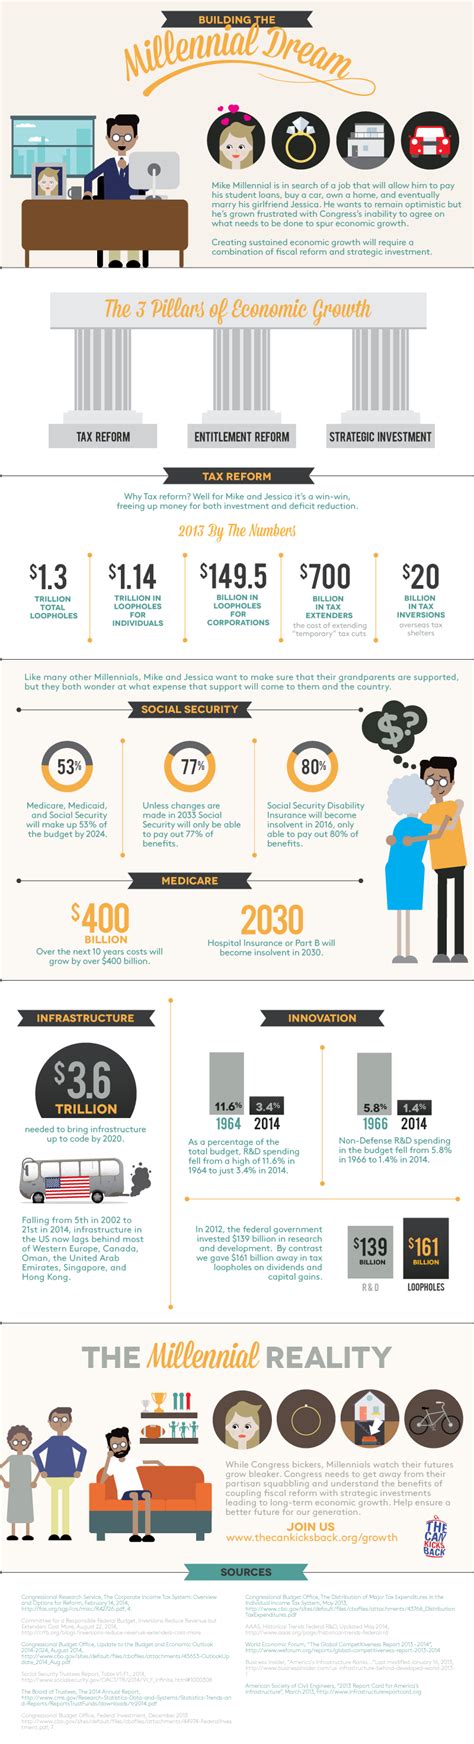 Building the Millennial Dream #infographic | Social media infographic, Educational infographic ...